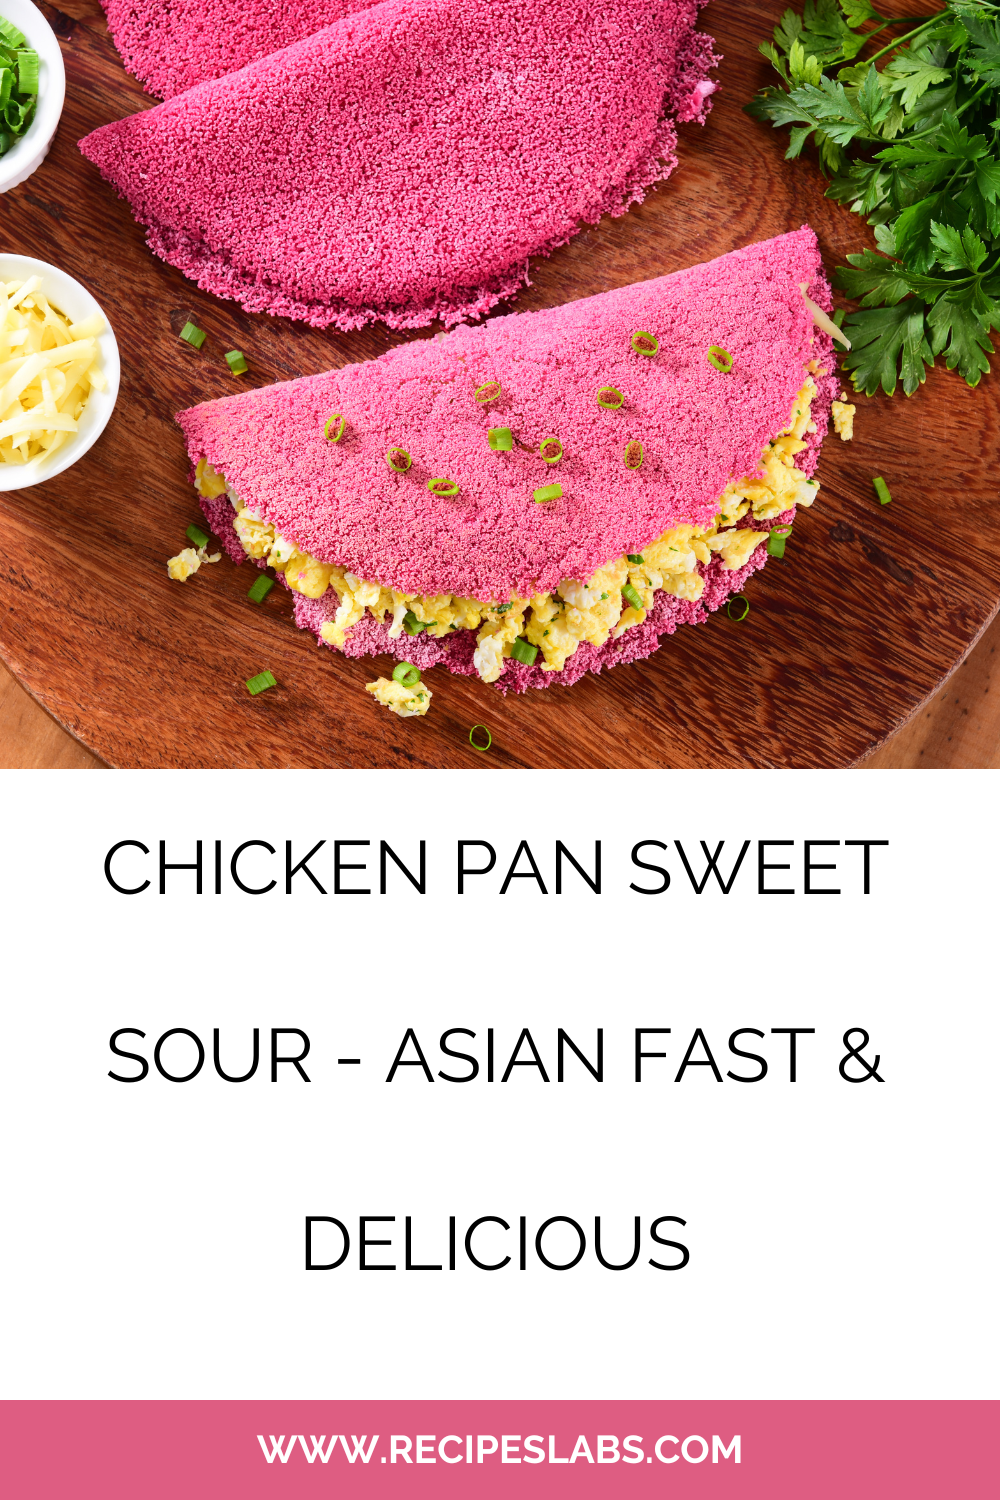 Chicken Pan Sweet Sour - Asian Fast & Delicious